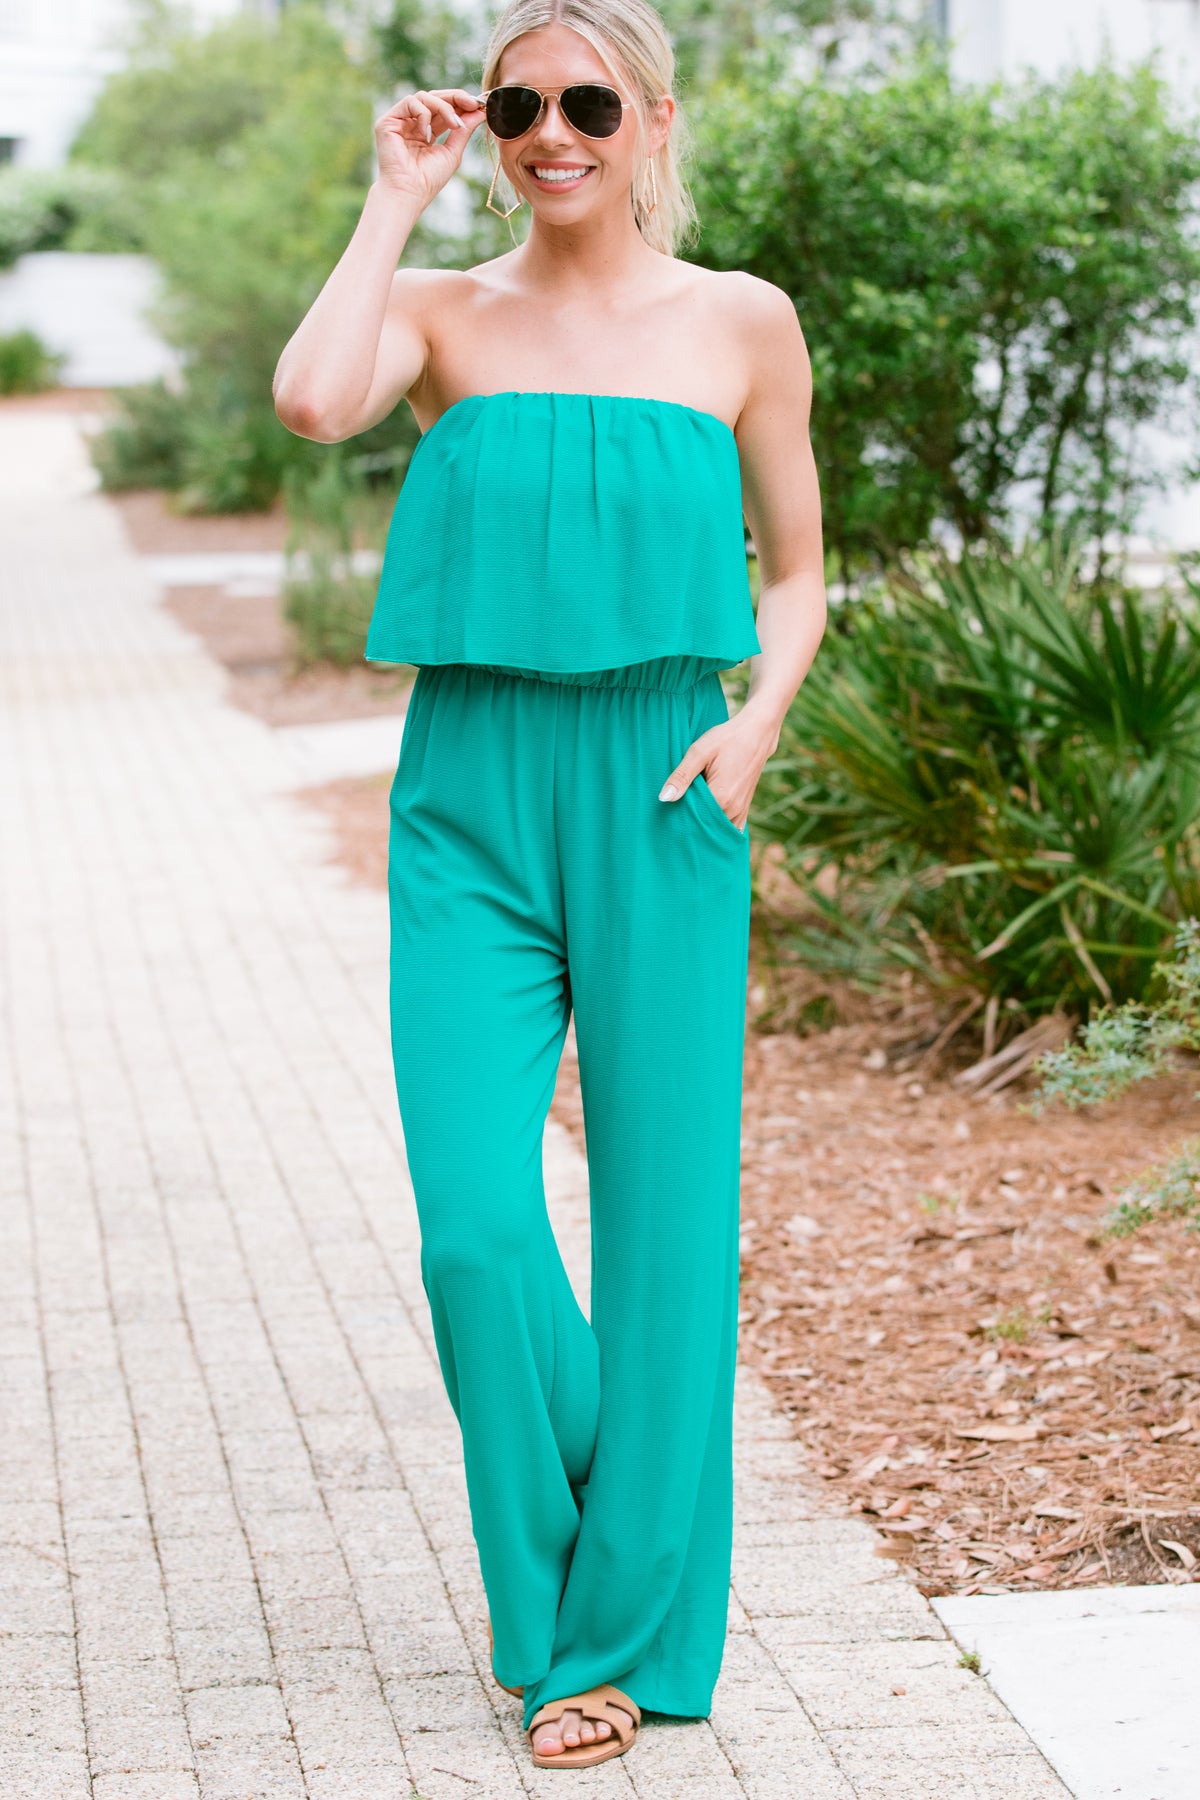 It's Your Day Jade Green Strapless Jumpsuit – Shop the Mint